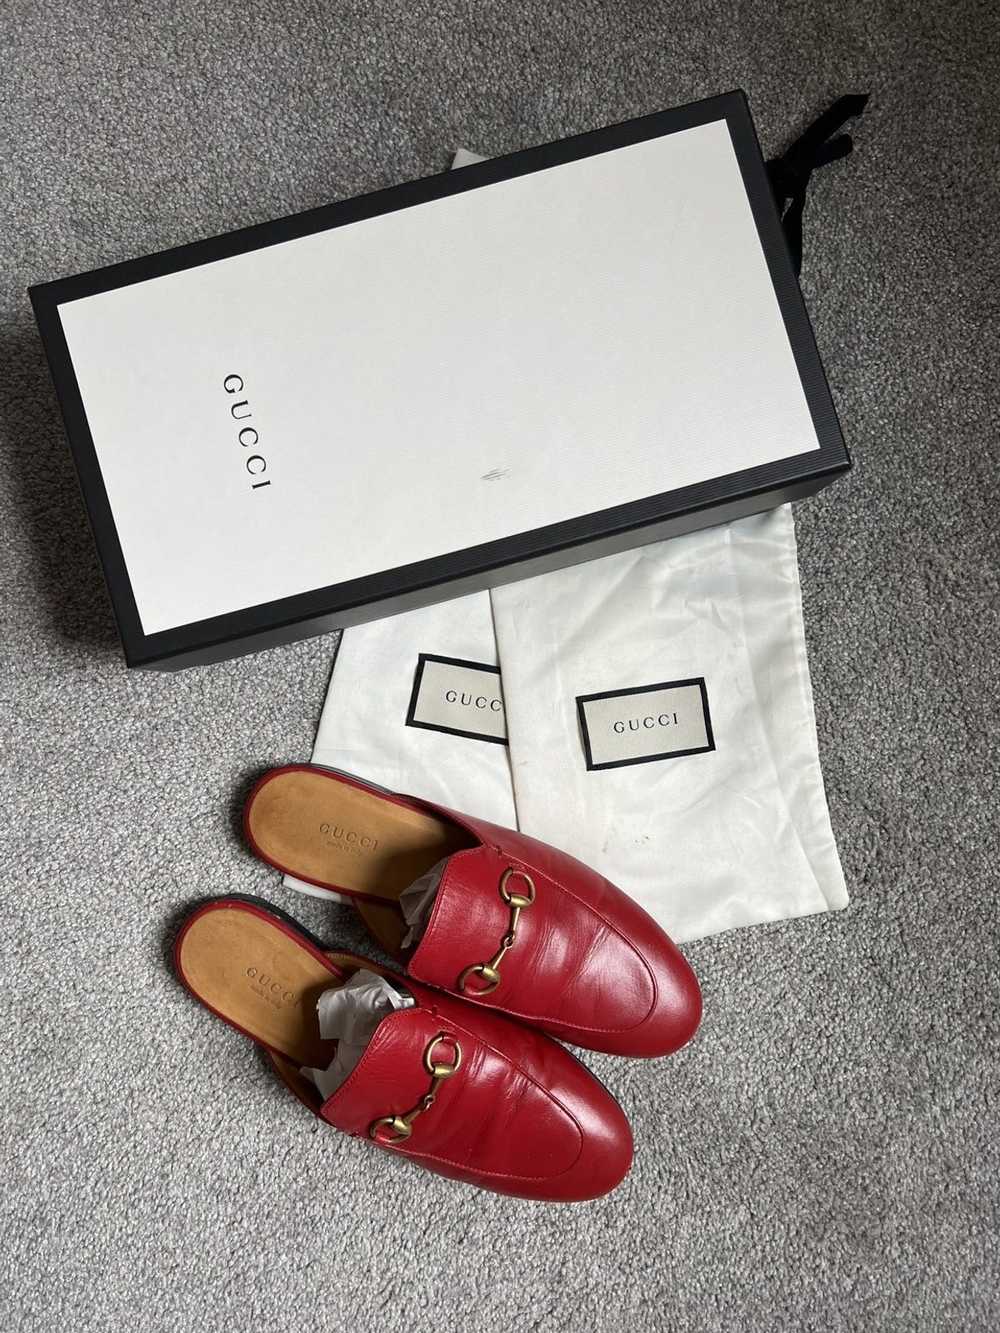 Gucci Gucci princetown leather mule - image 6